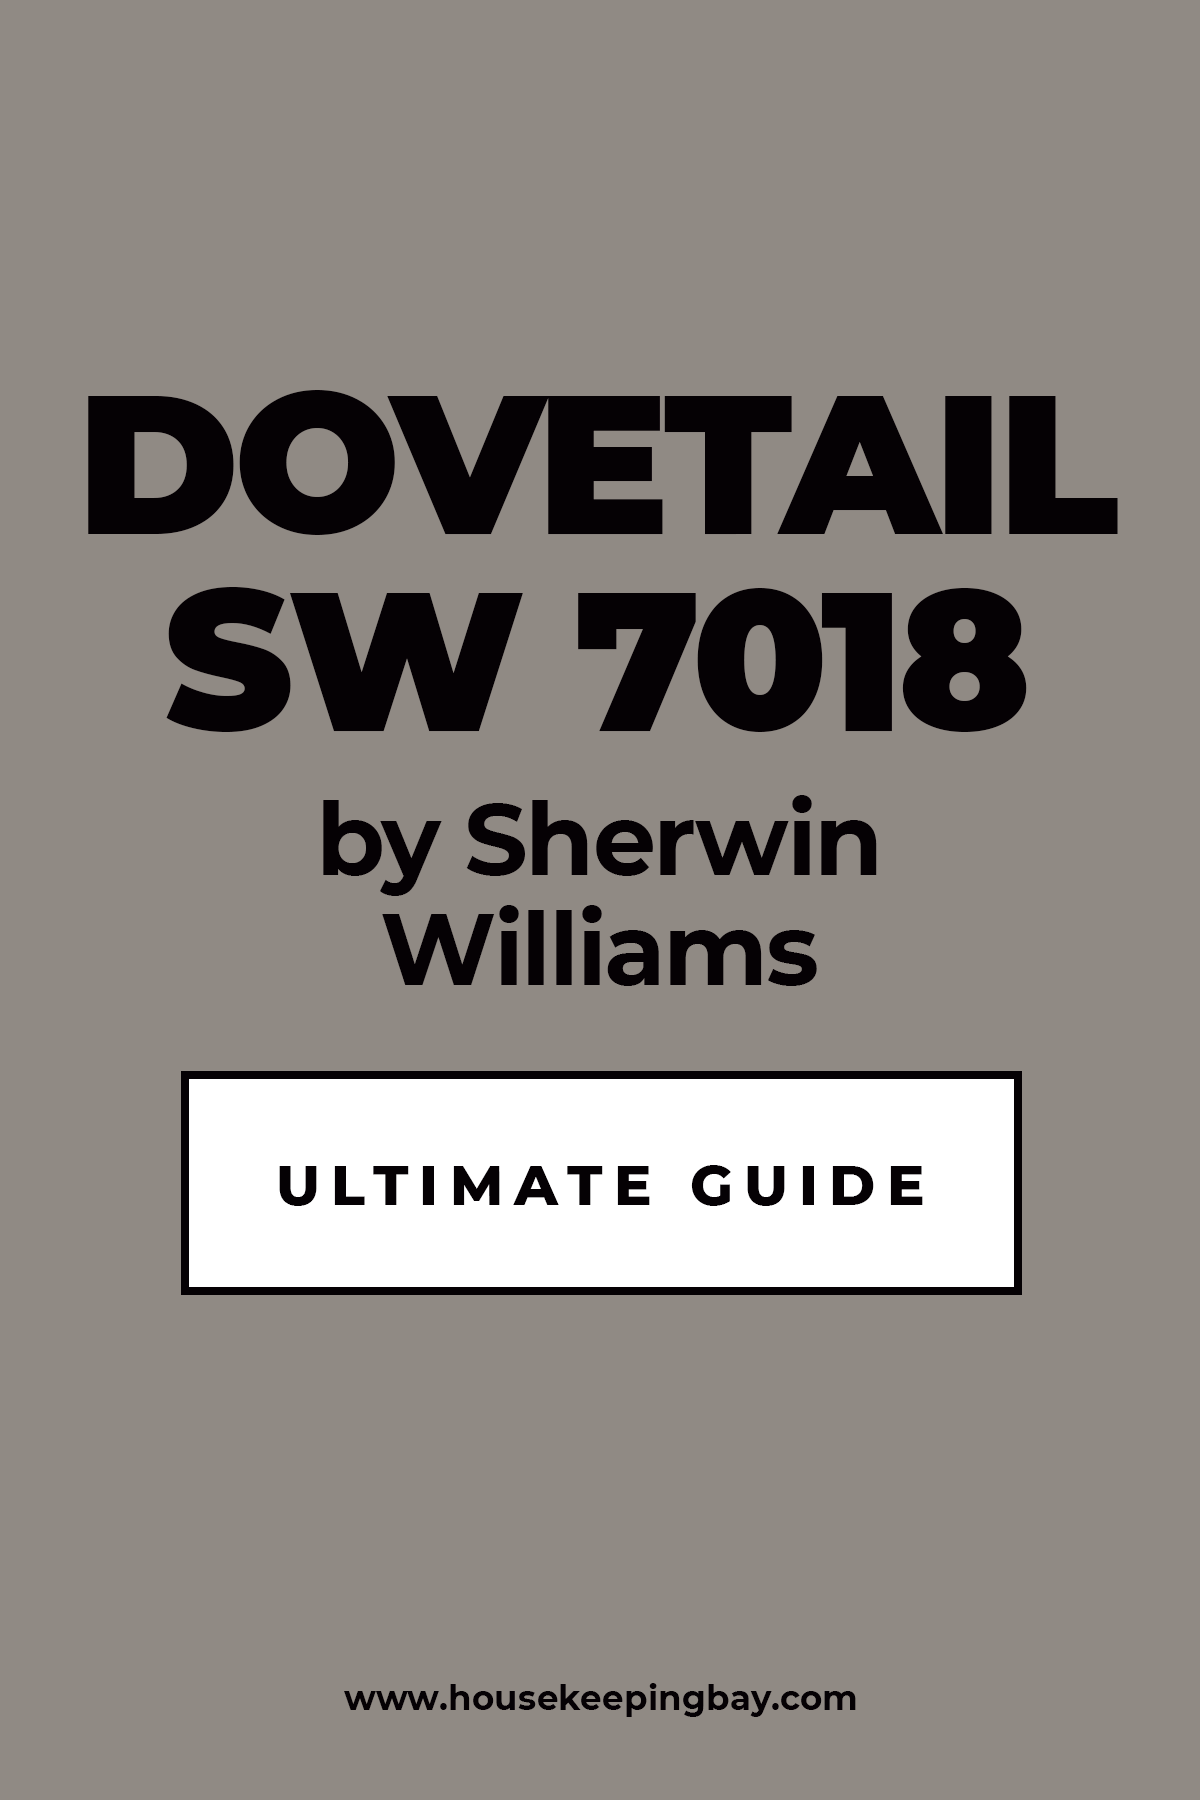 Dovetail SW 7018 by Sherwin Williams Ultimate Guide